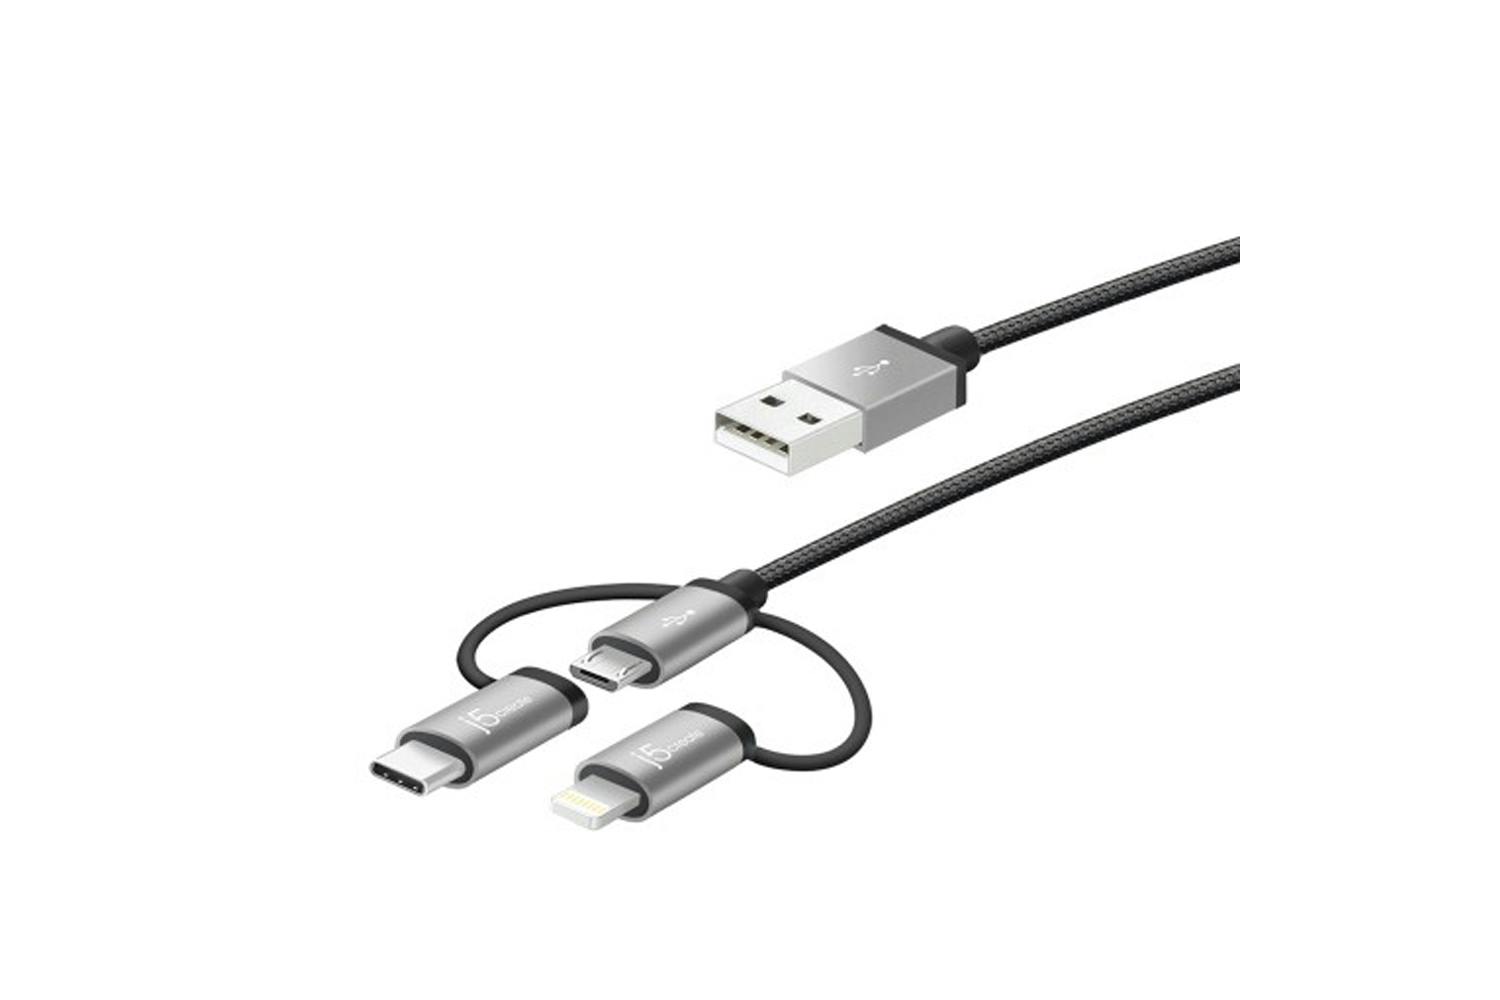 Acqua 3-in-1 Fast Charge USB Cable | Black/Sliver